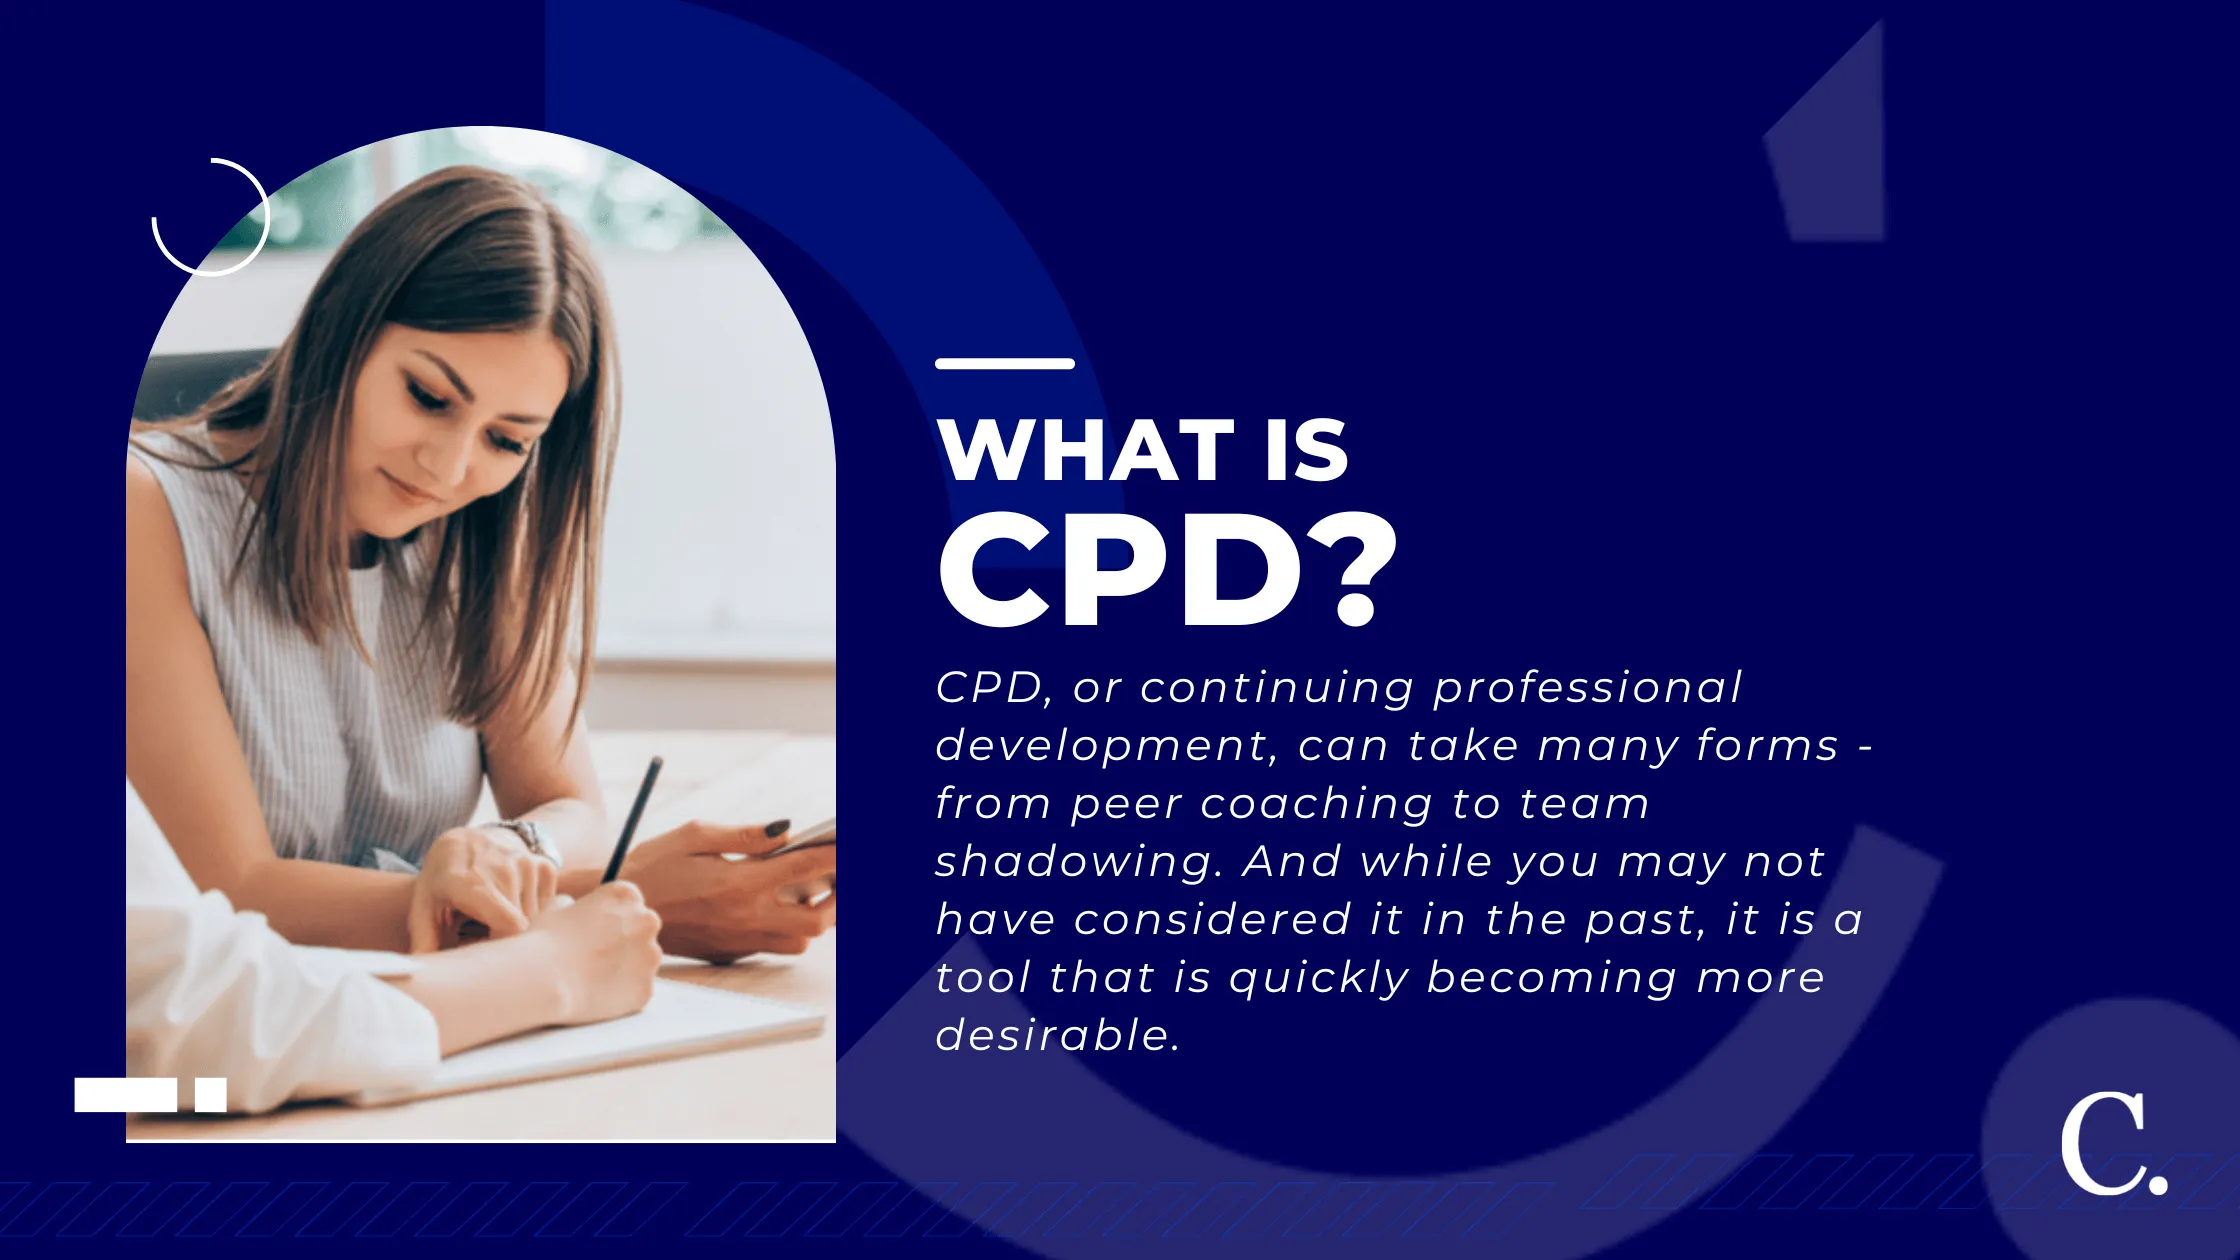 What is CPD, and why is it important?